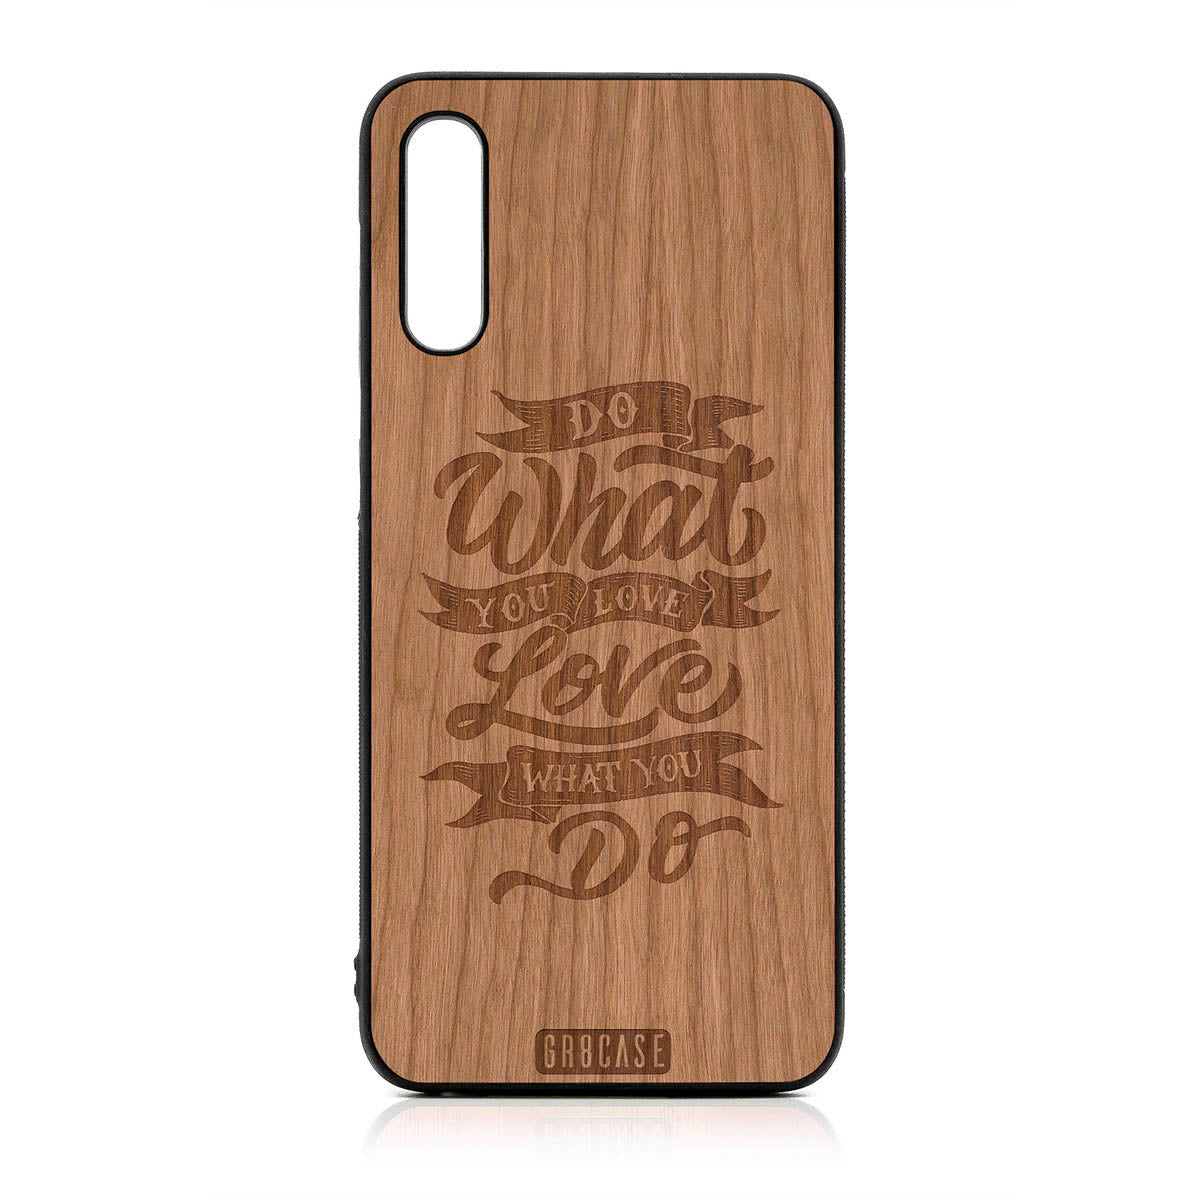 Do What You Love Love What You Do Design Wood Case For Samsung Galaxy A50 by GR8CASE